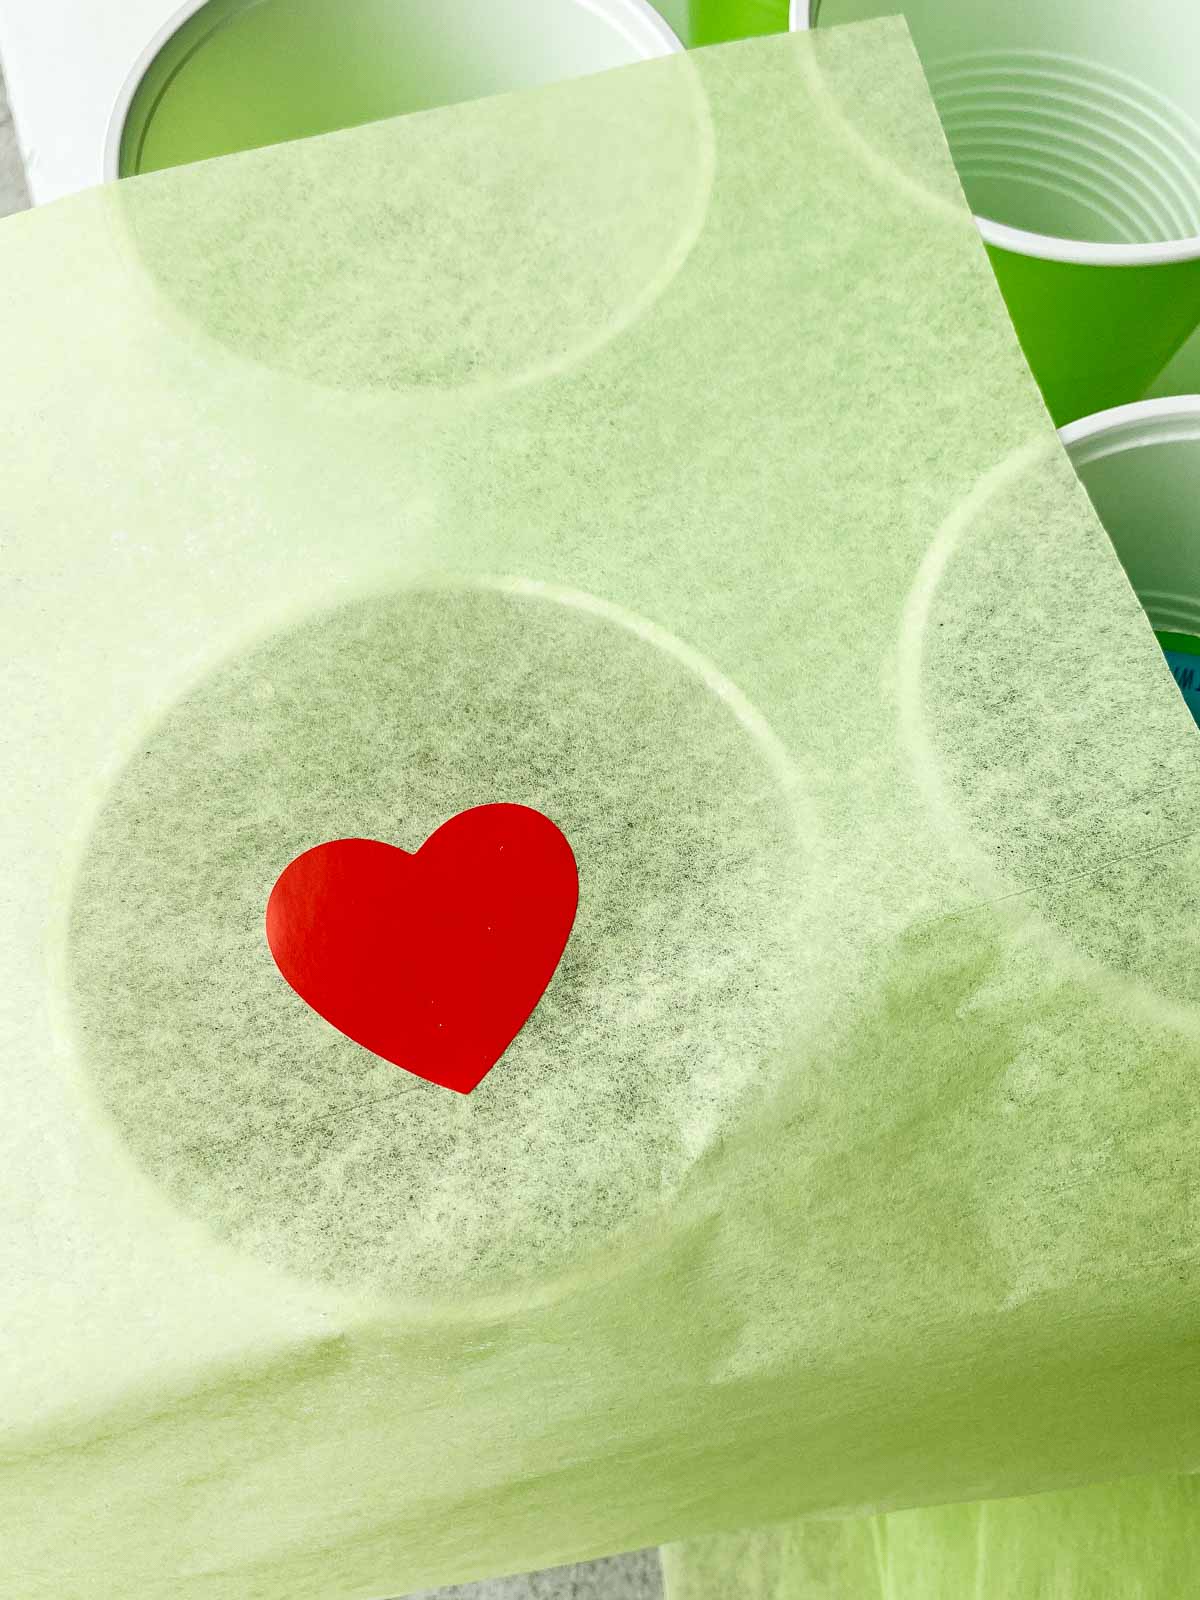 green tissue paper on top of plastic cups